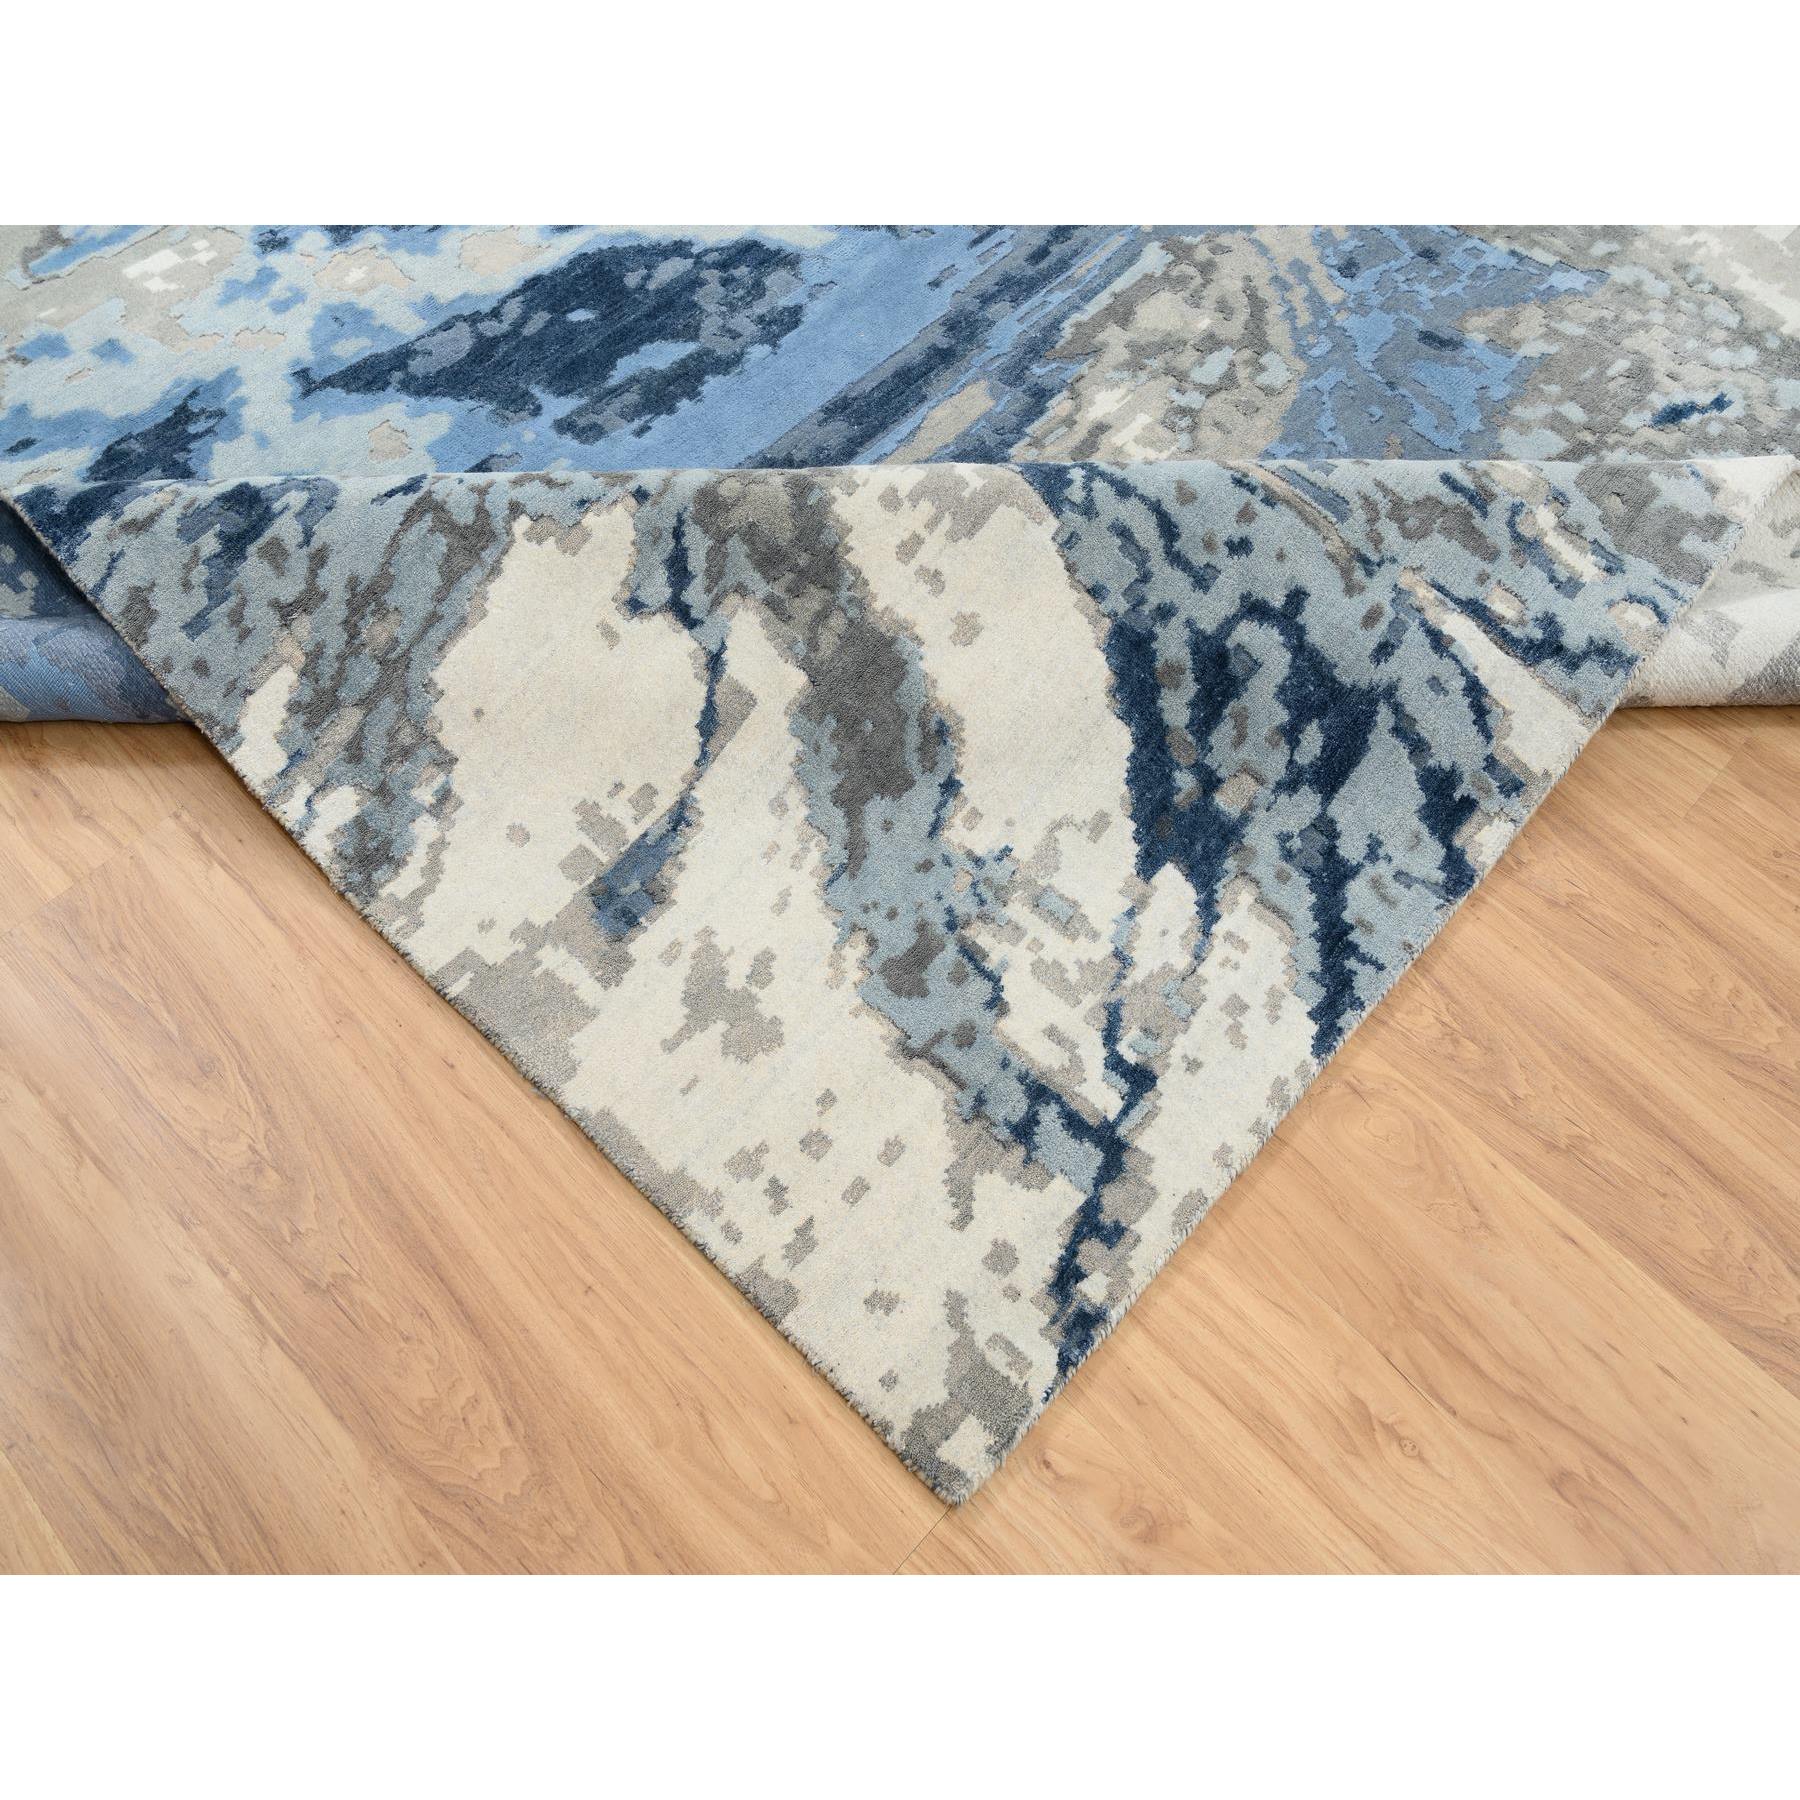 11'10"x12' Beige and Blue, Wool and Silk Hand Woven, Abstract Design Hi-Low Pile, Square Oriental Rug 